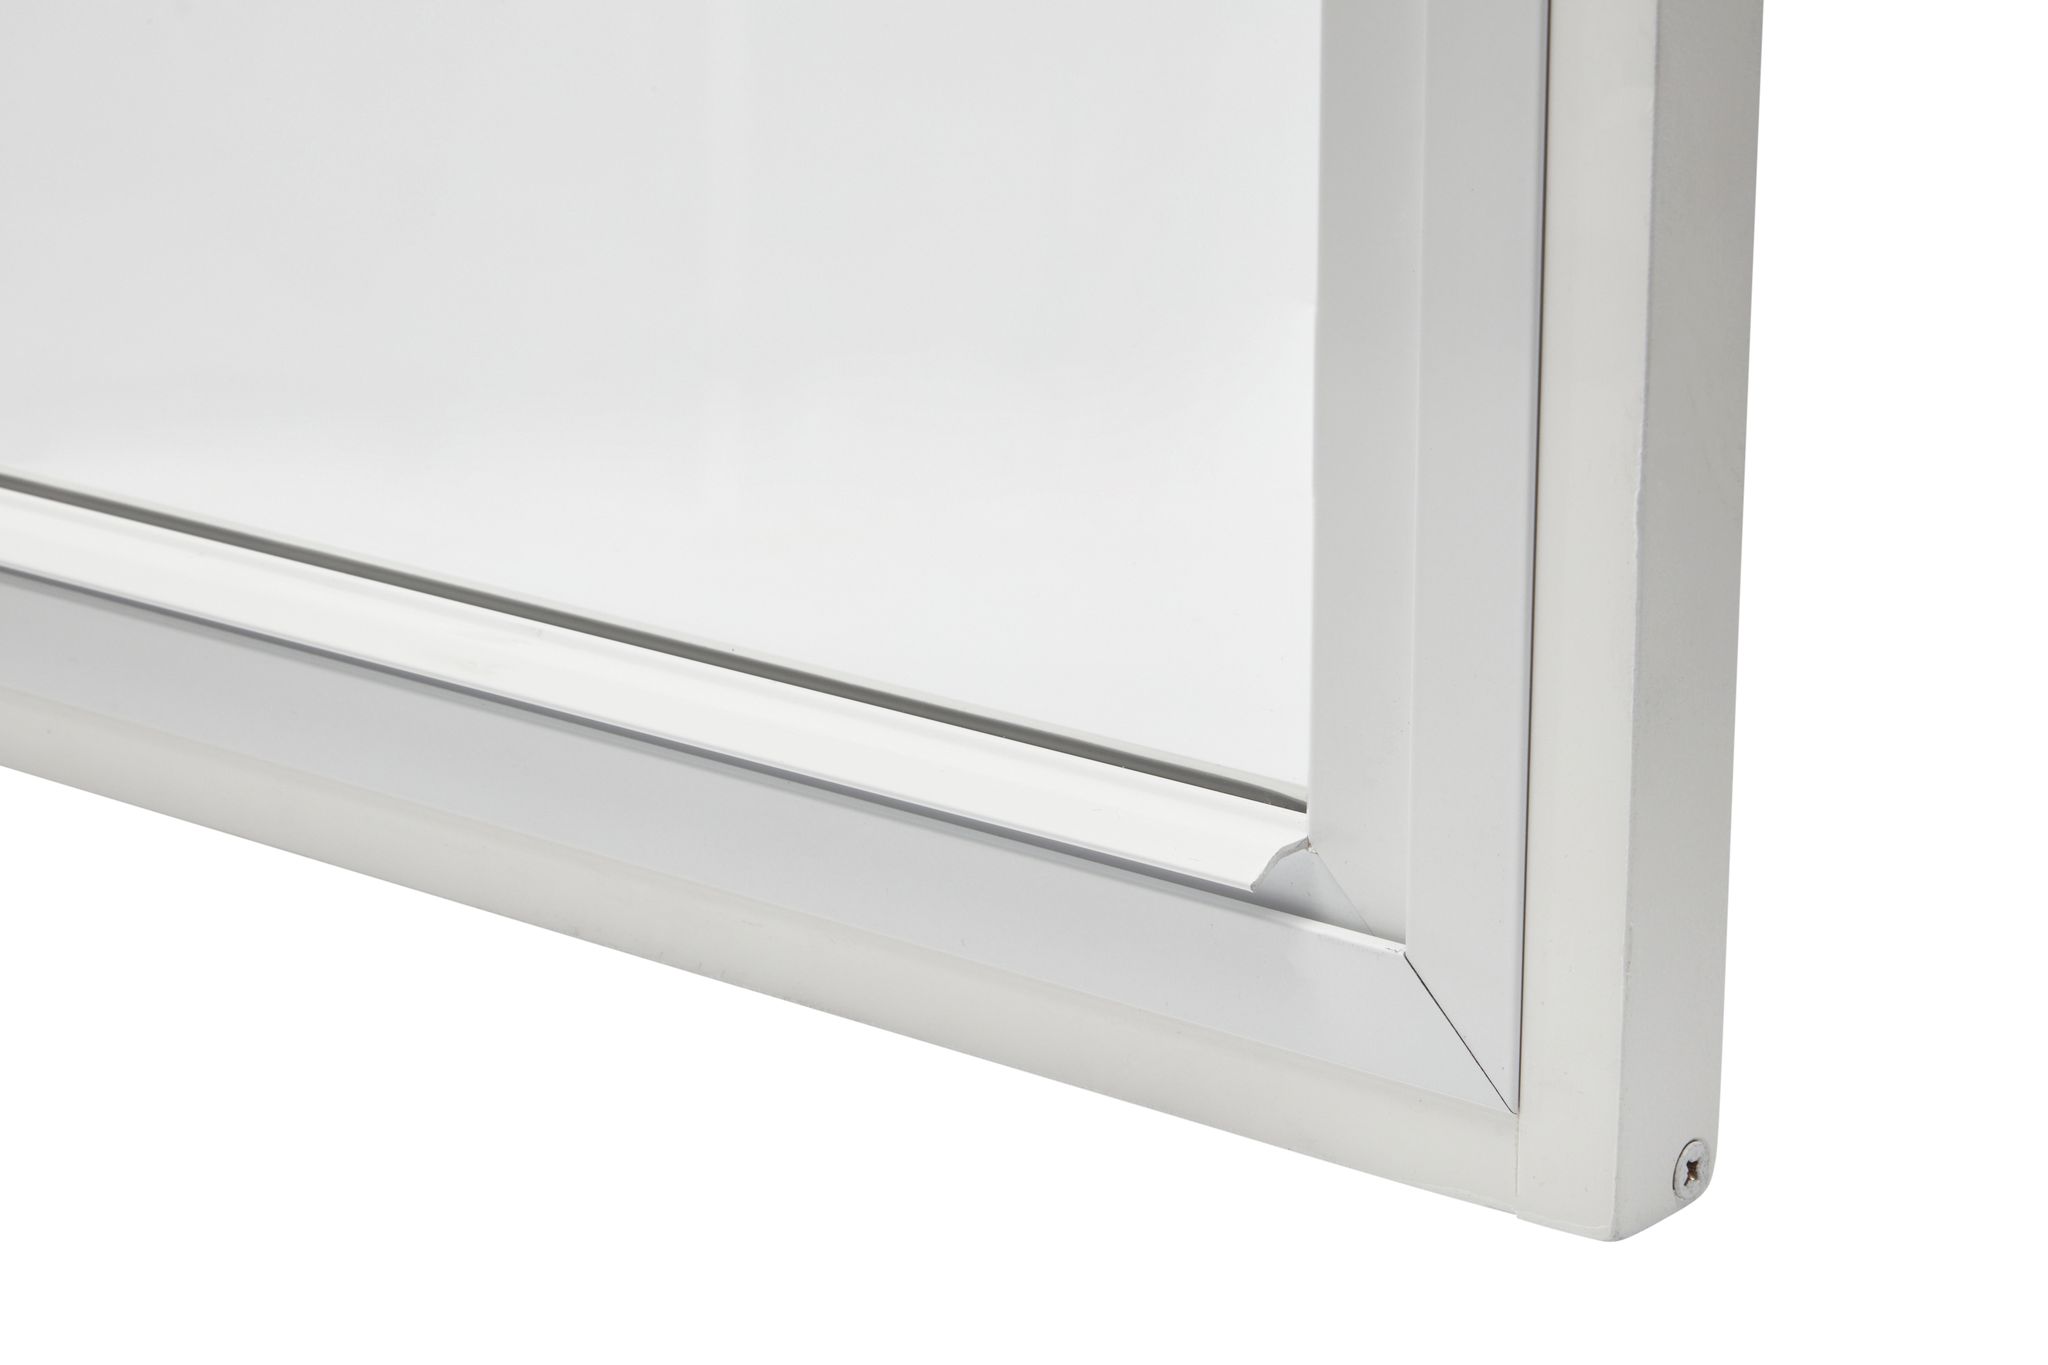 Great deals on Lift Out secondary glazing unit